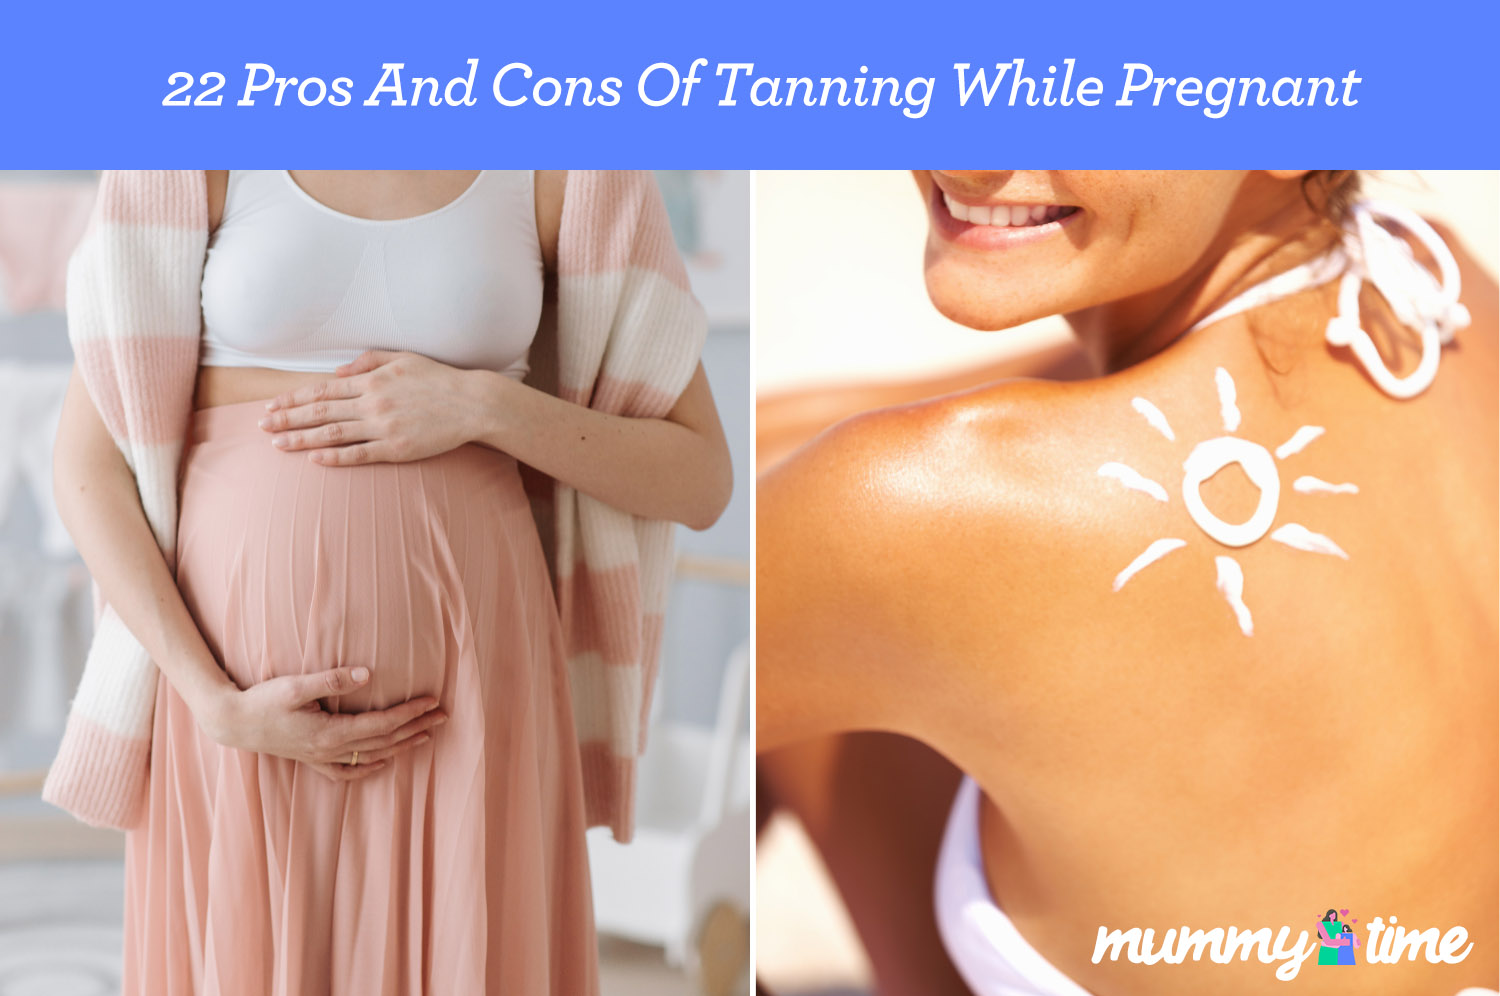 11 Pros And Cons Of Tanning While Pregnant